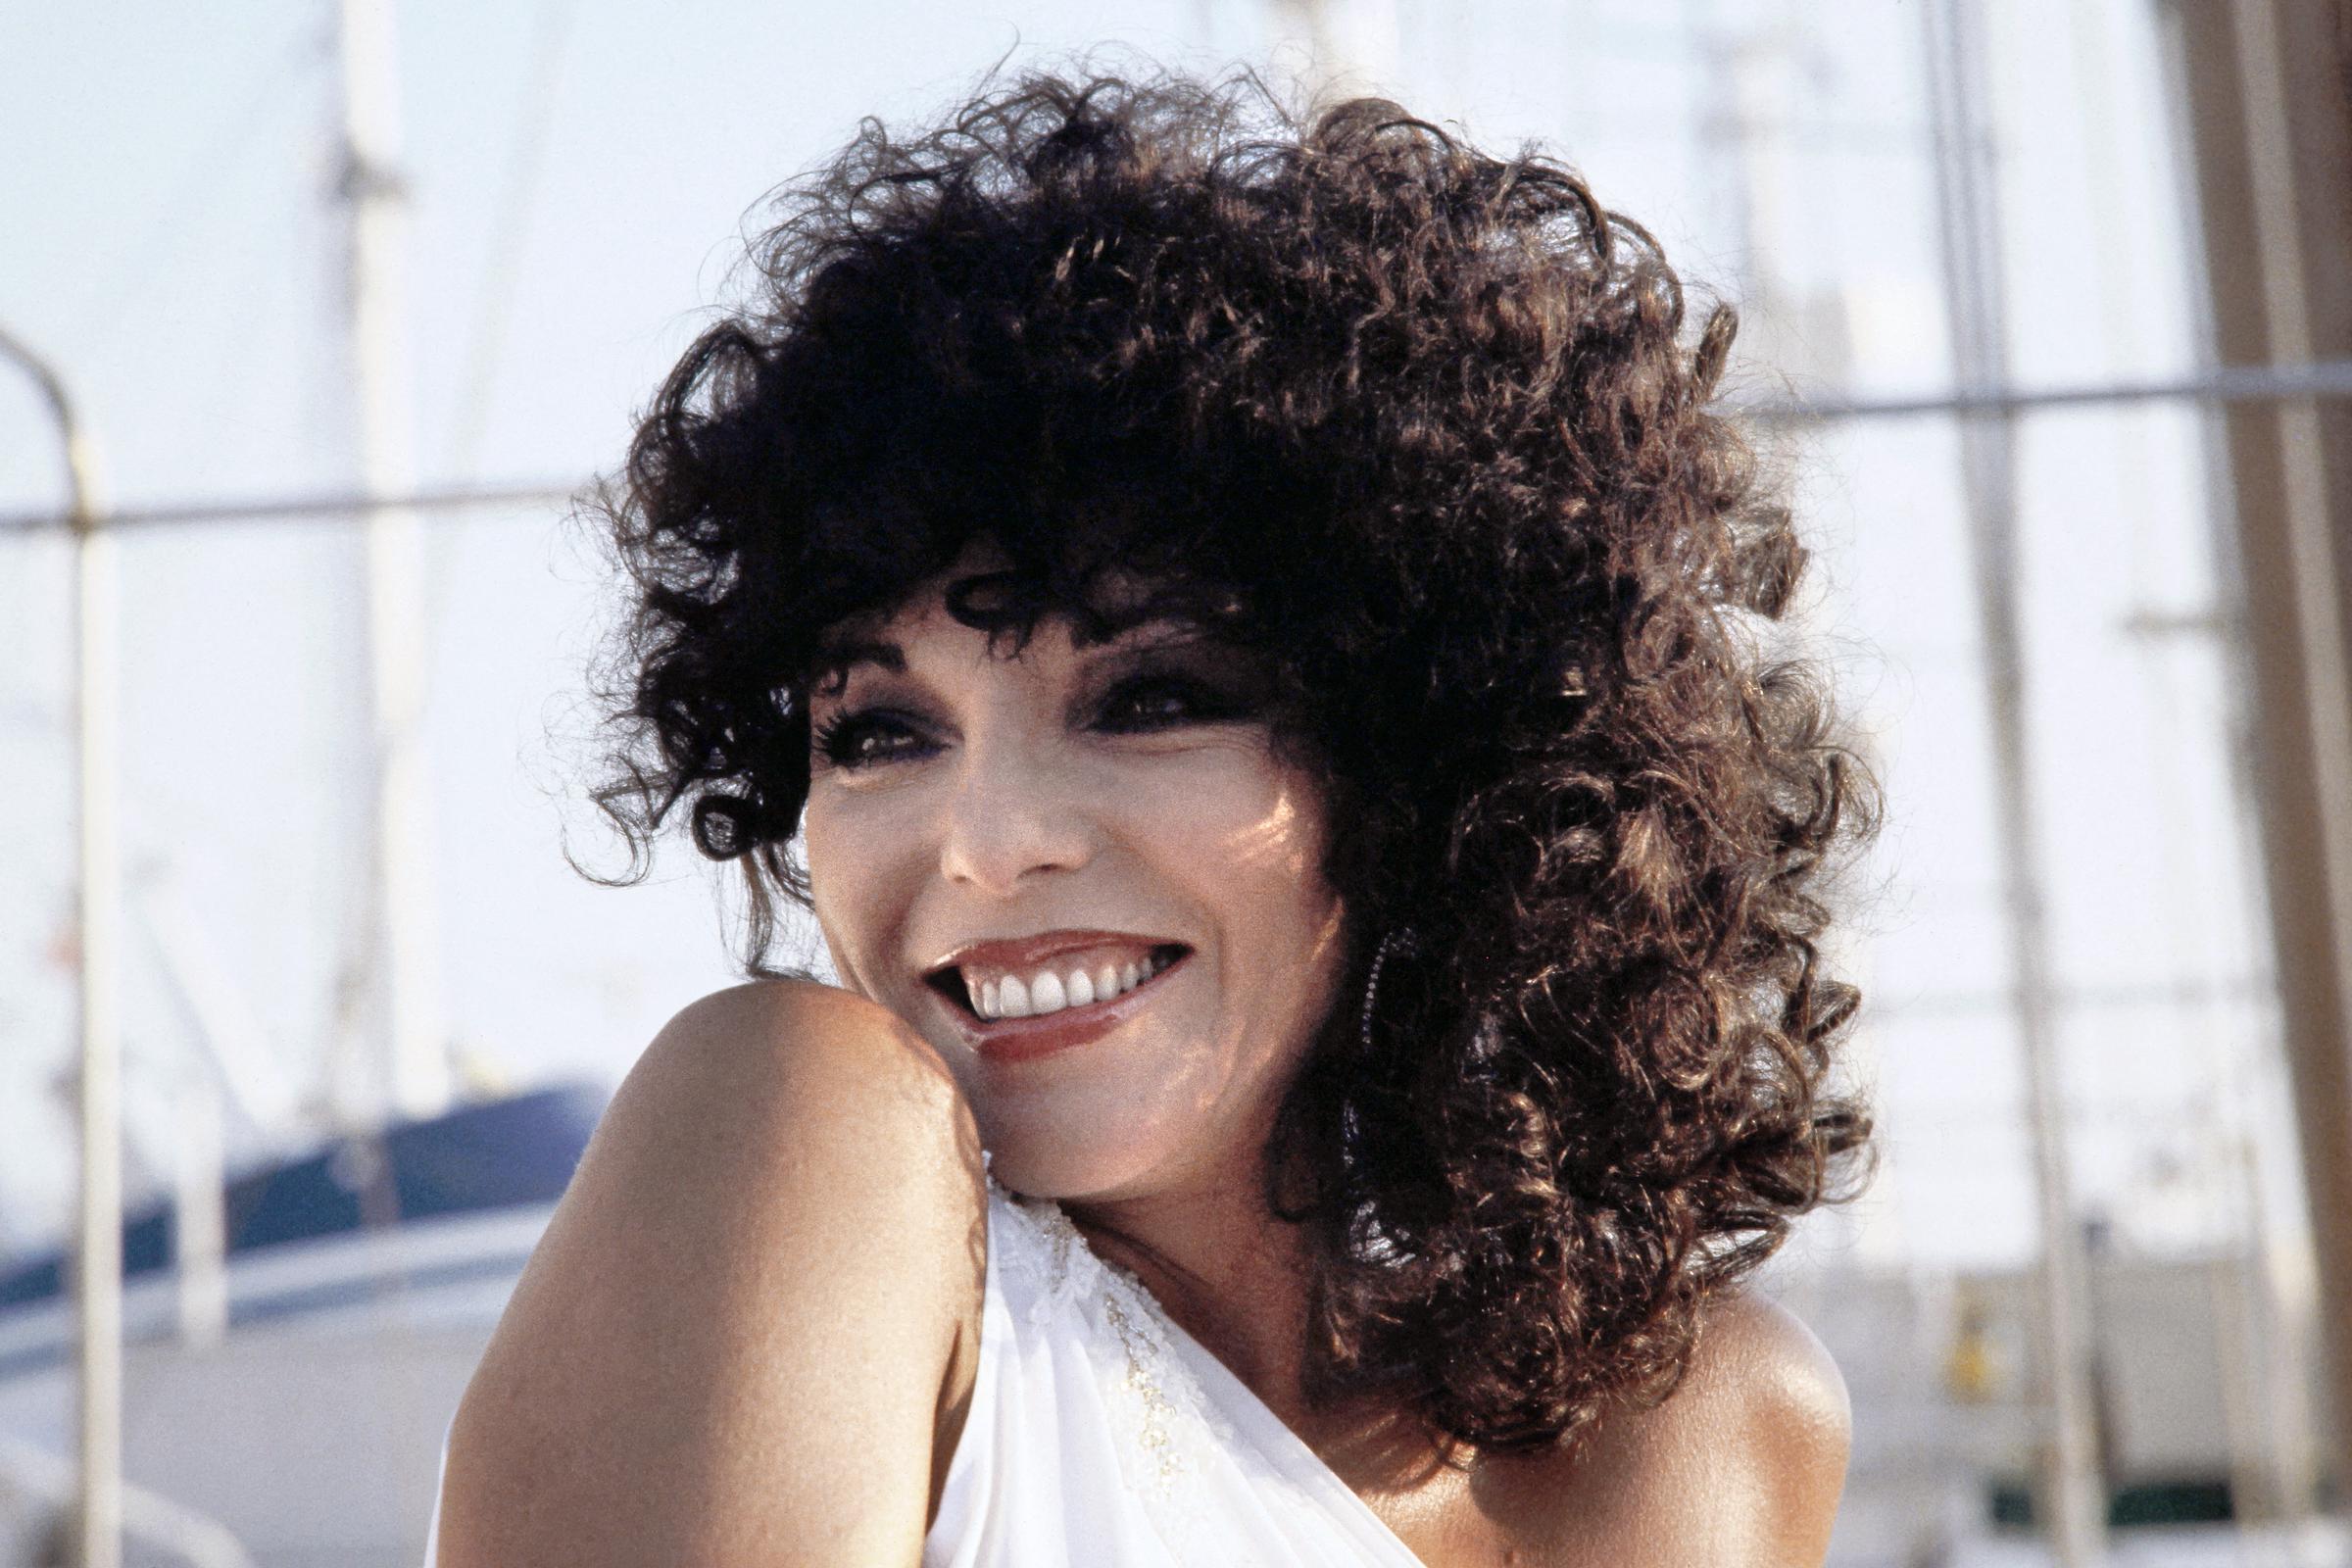 Joan Collins during the International Film Festival in Cannes, France, in May 1972. | Source: Getty Images